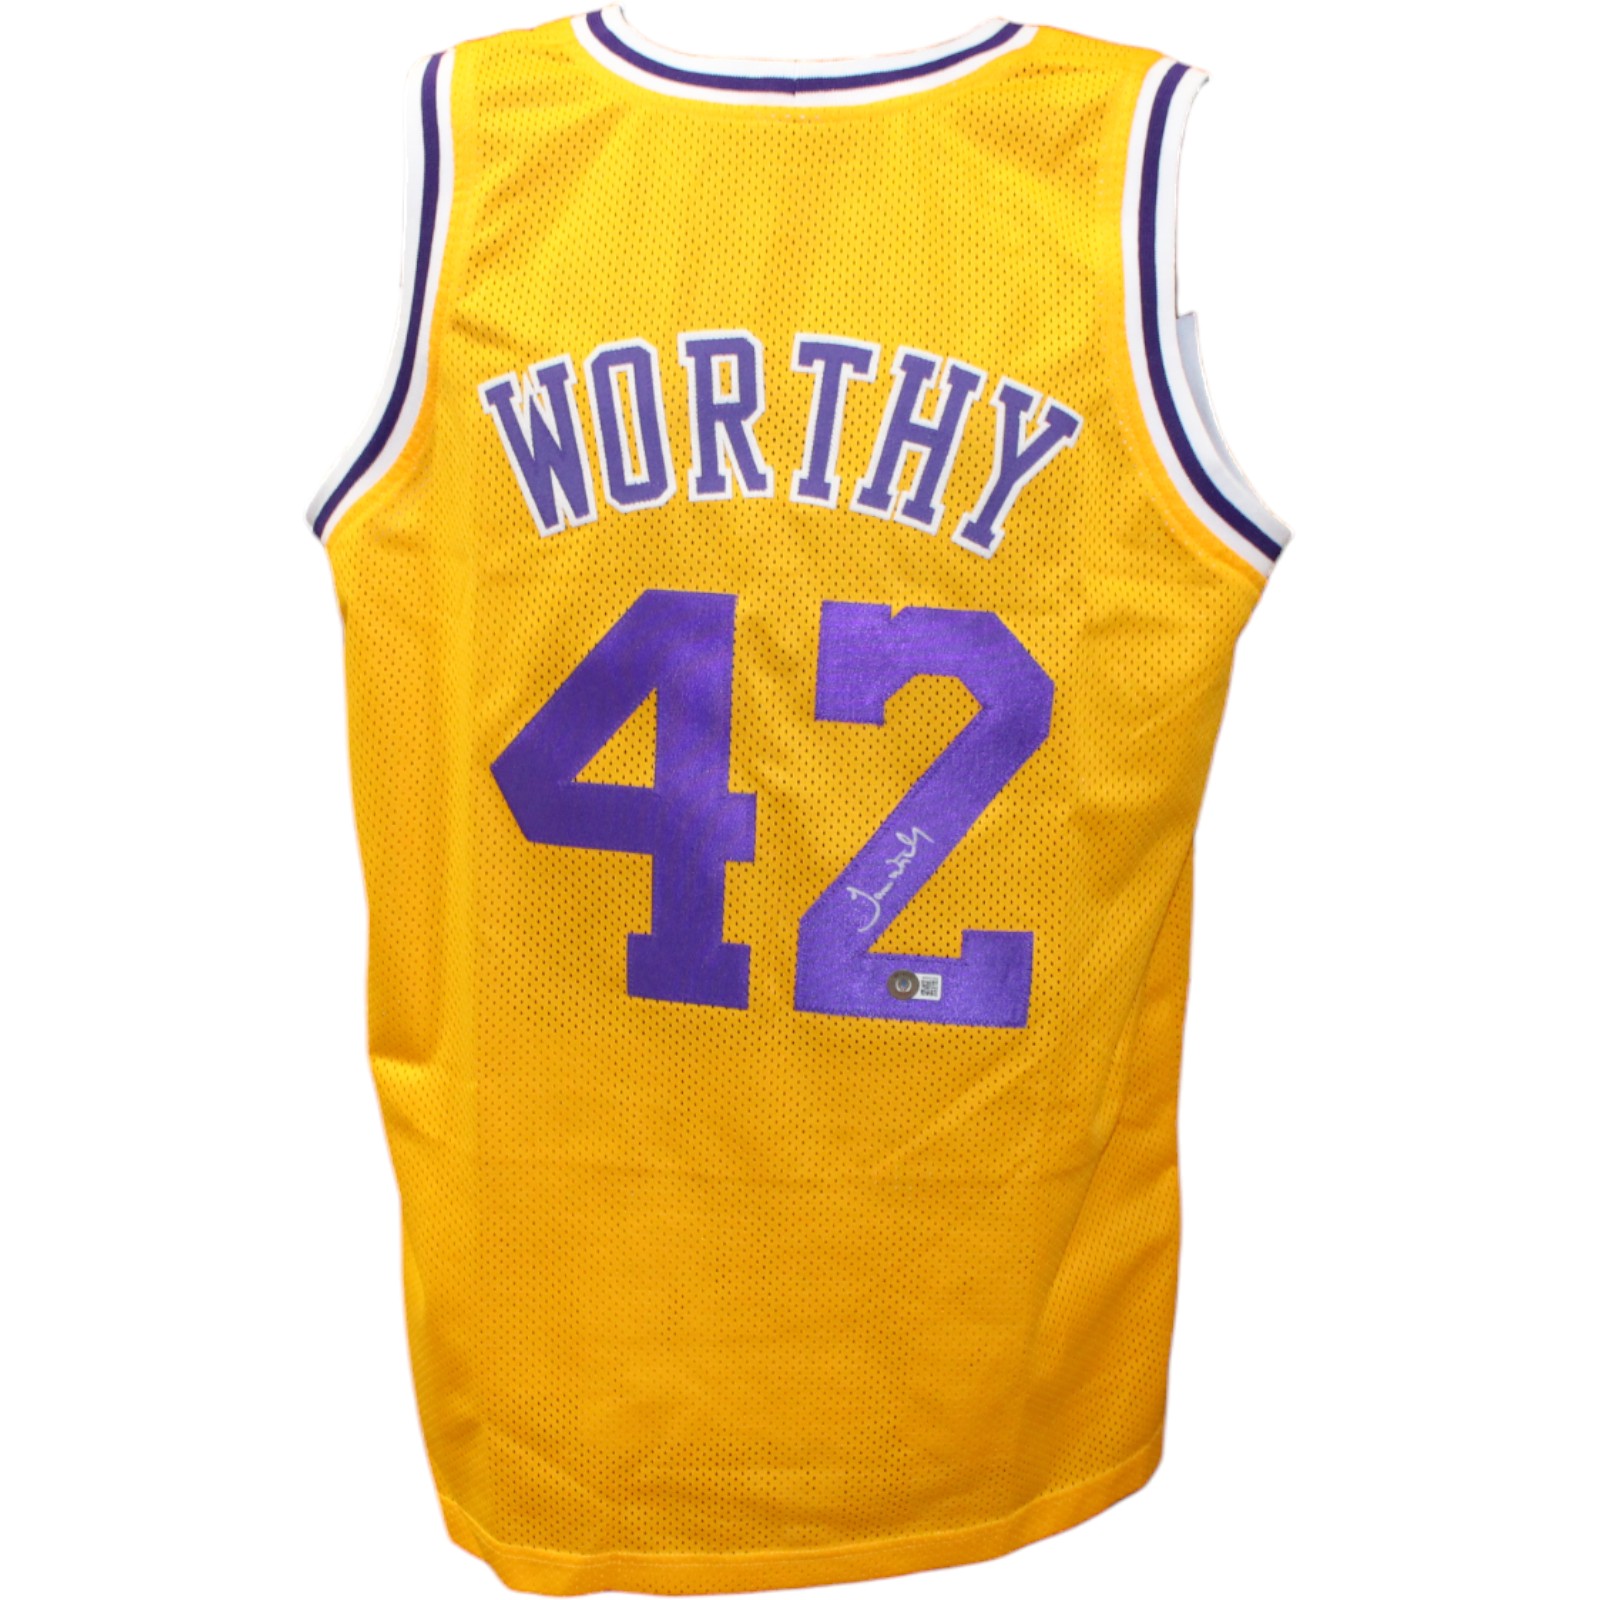 James Worthy Autographed/Signed Pro Style Yellow Jersey Beckett